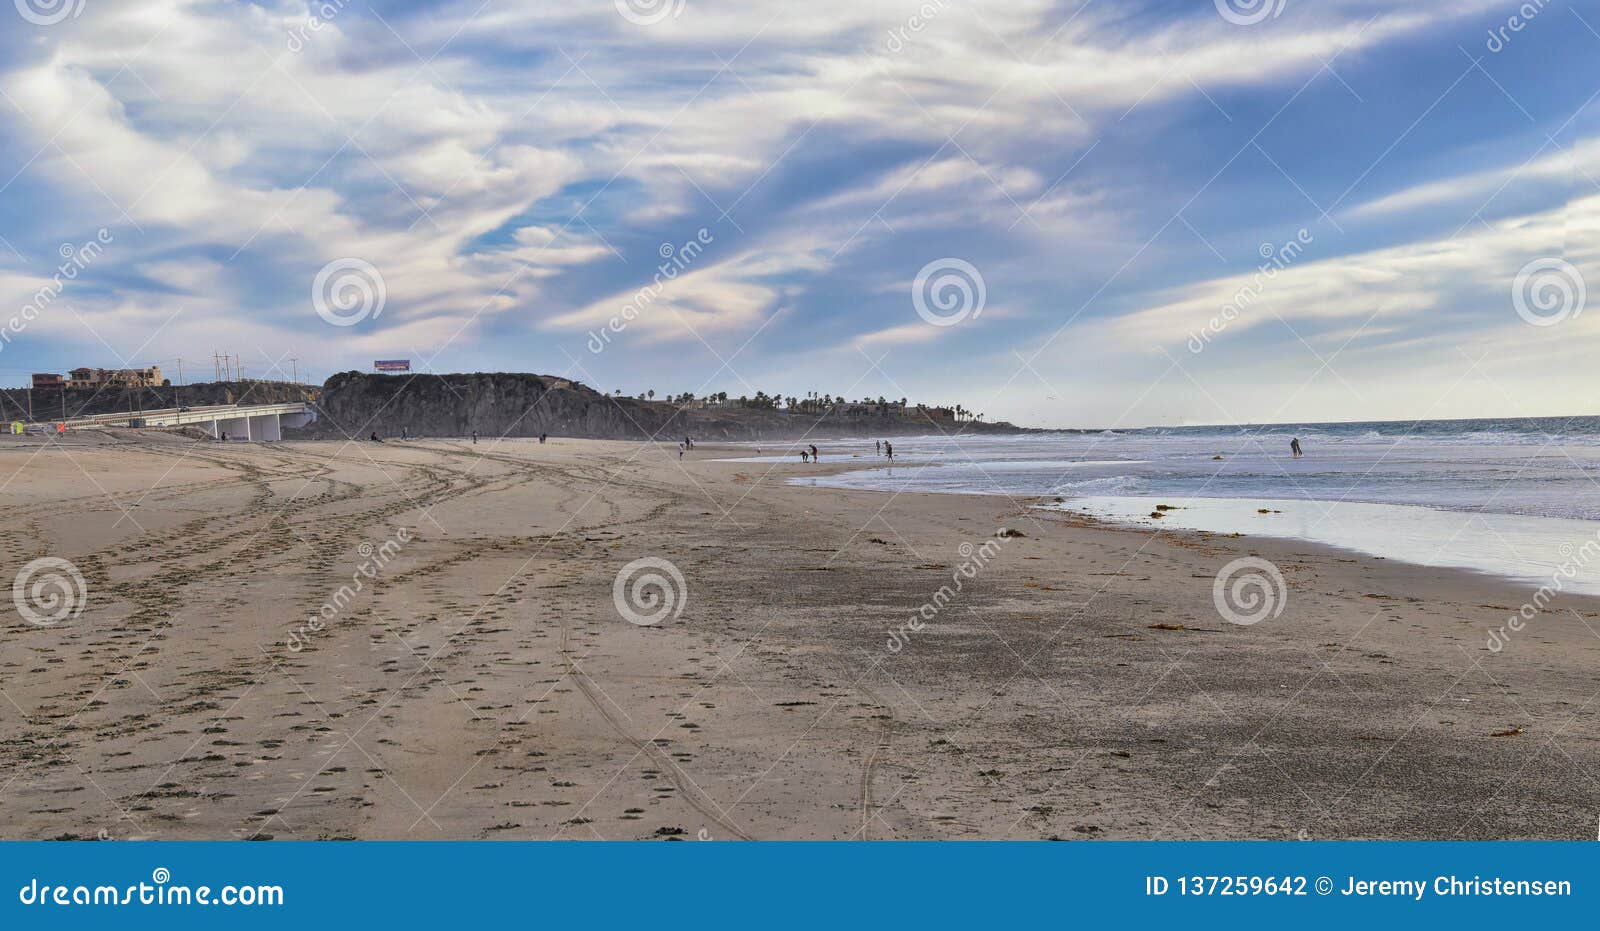 la mision valley landscapes and beach in mexico on the west coast a small canyon near the pacific ocean that houses the door of fa